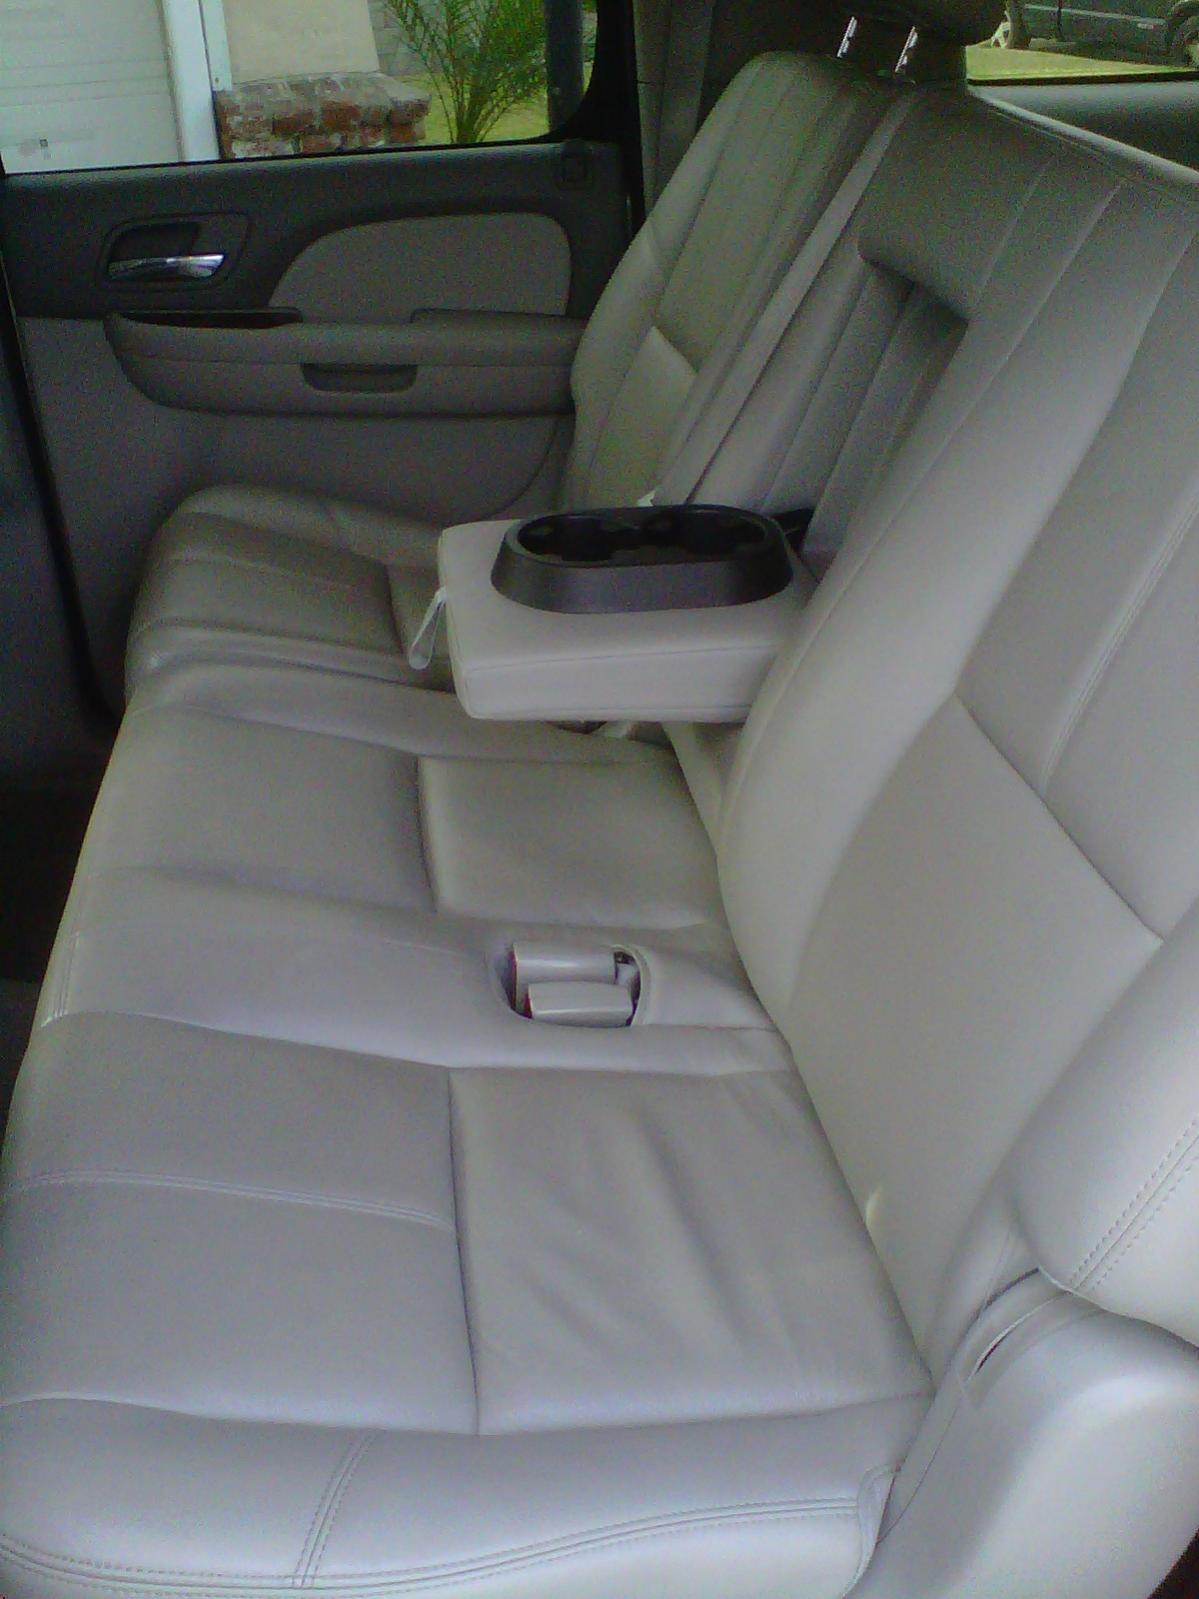 changing 2nd row seats to bucket seat - Chevrolet Forum - Chevy Enthusiasts Forums Chevy Traverse 2nd Row Bucket Seats Removal